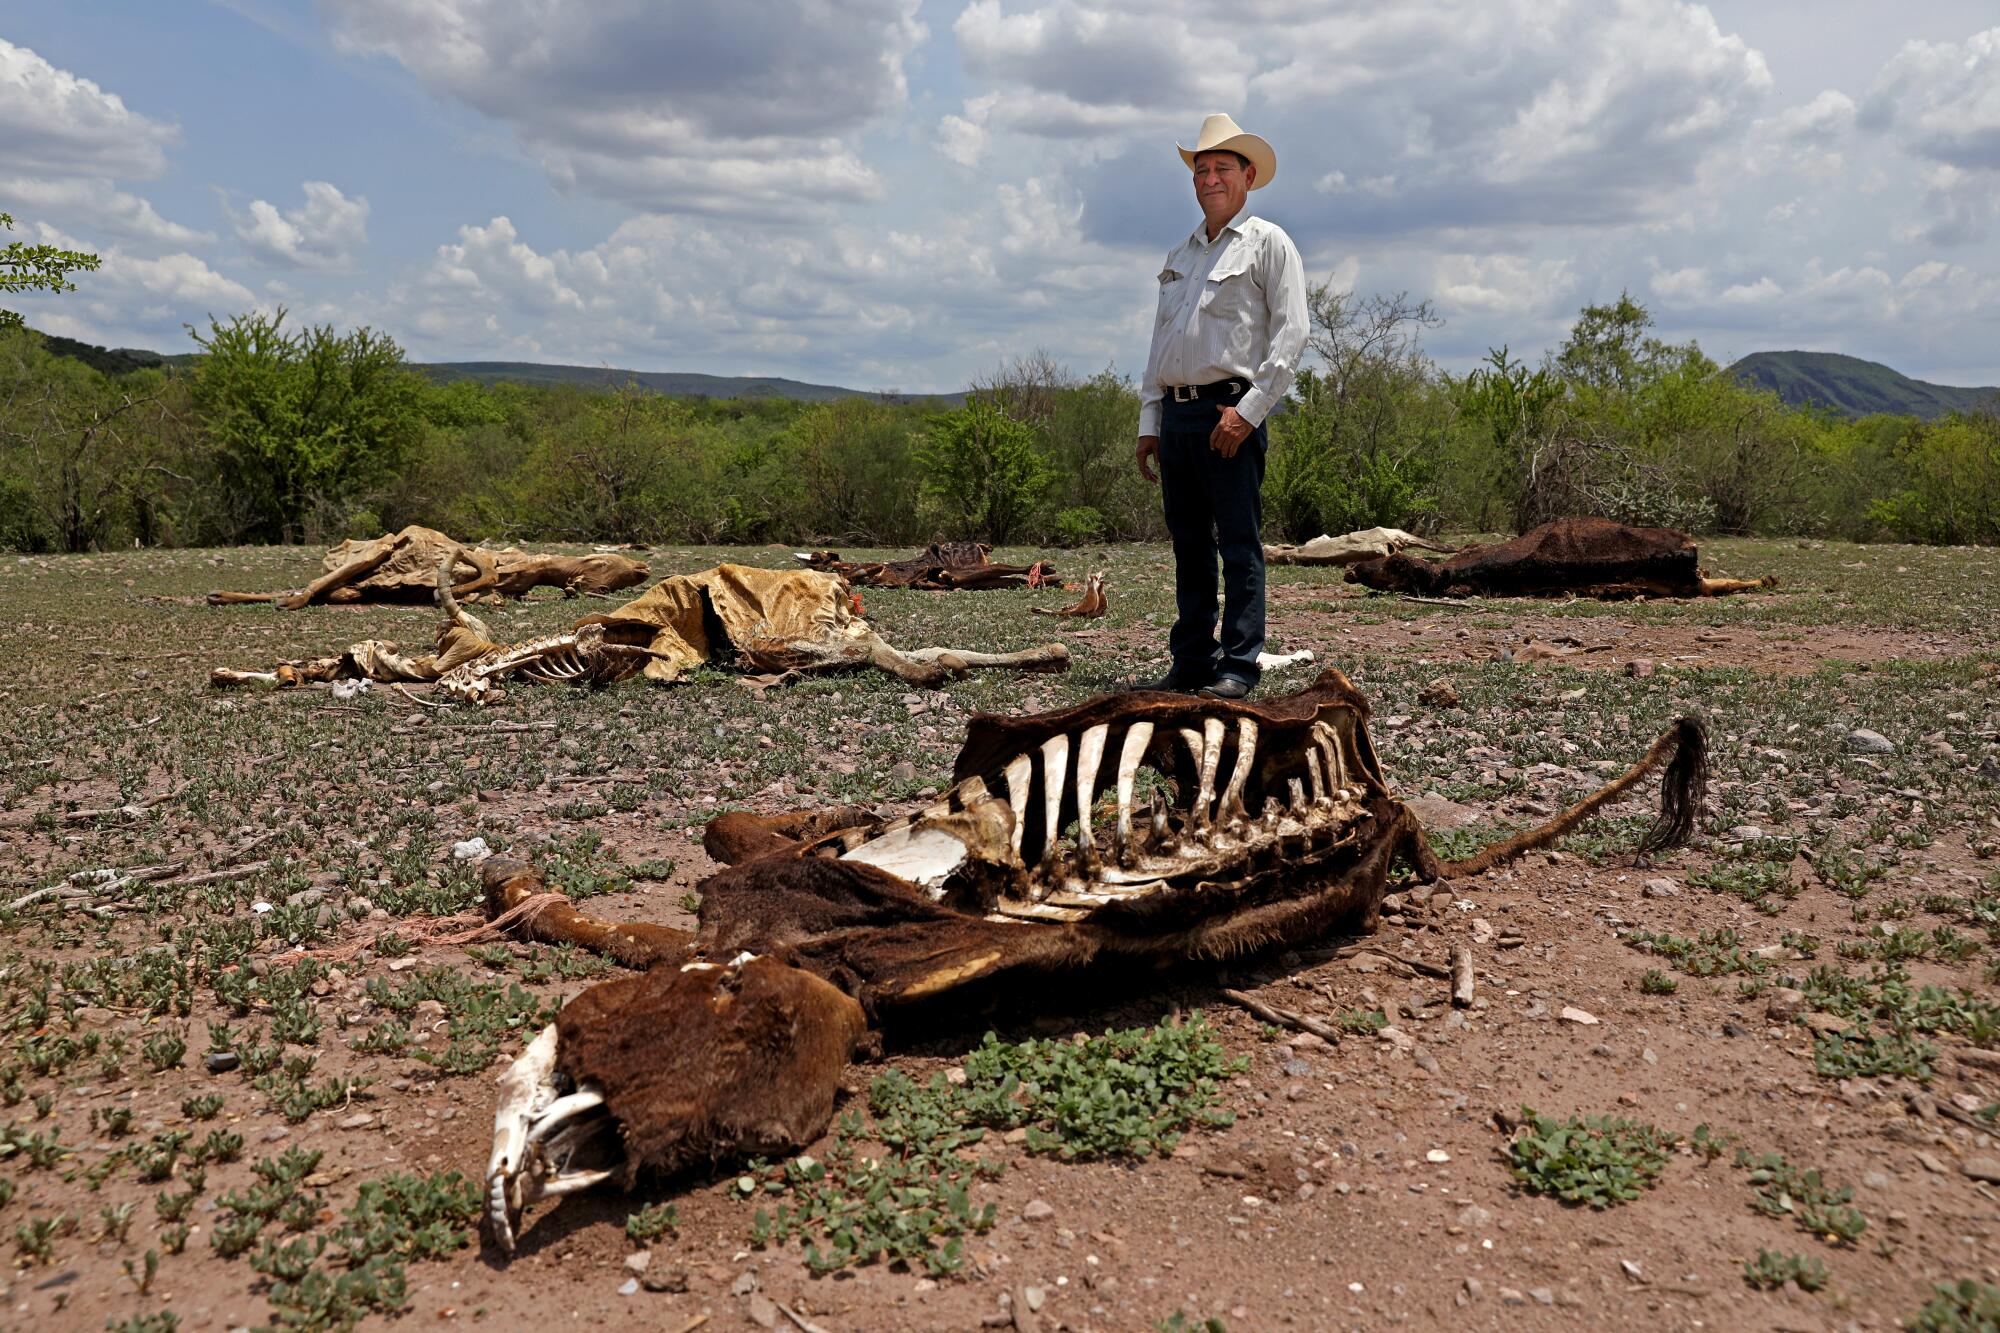 A rancher stands amid a field of cattle carcasses